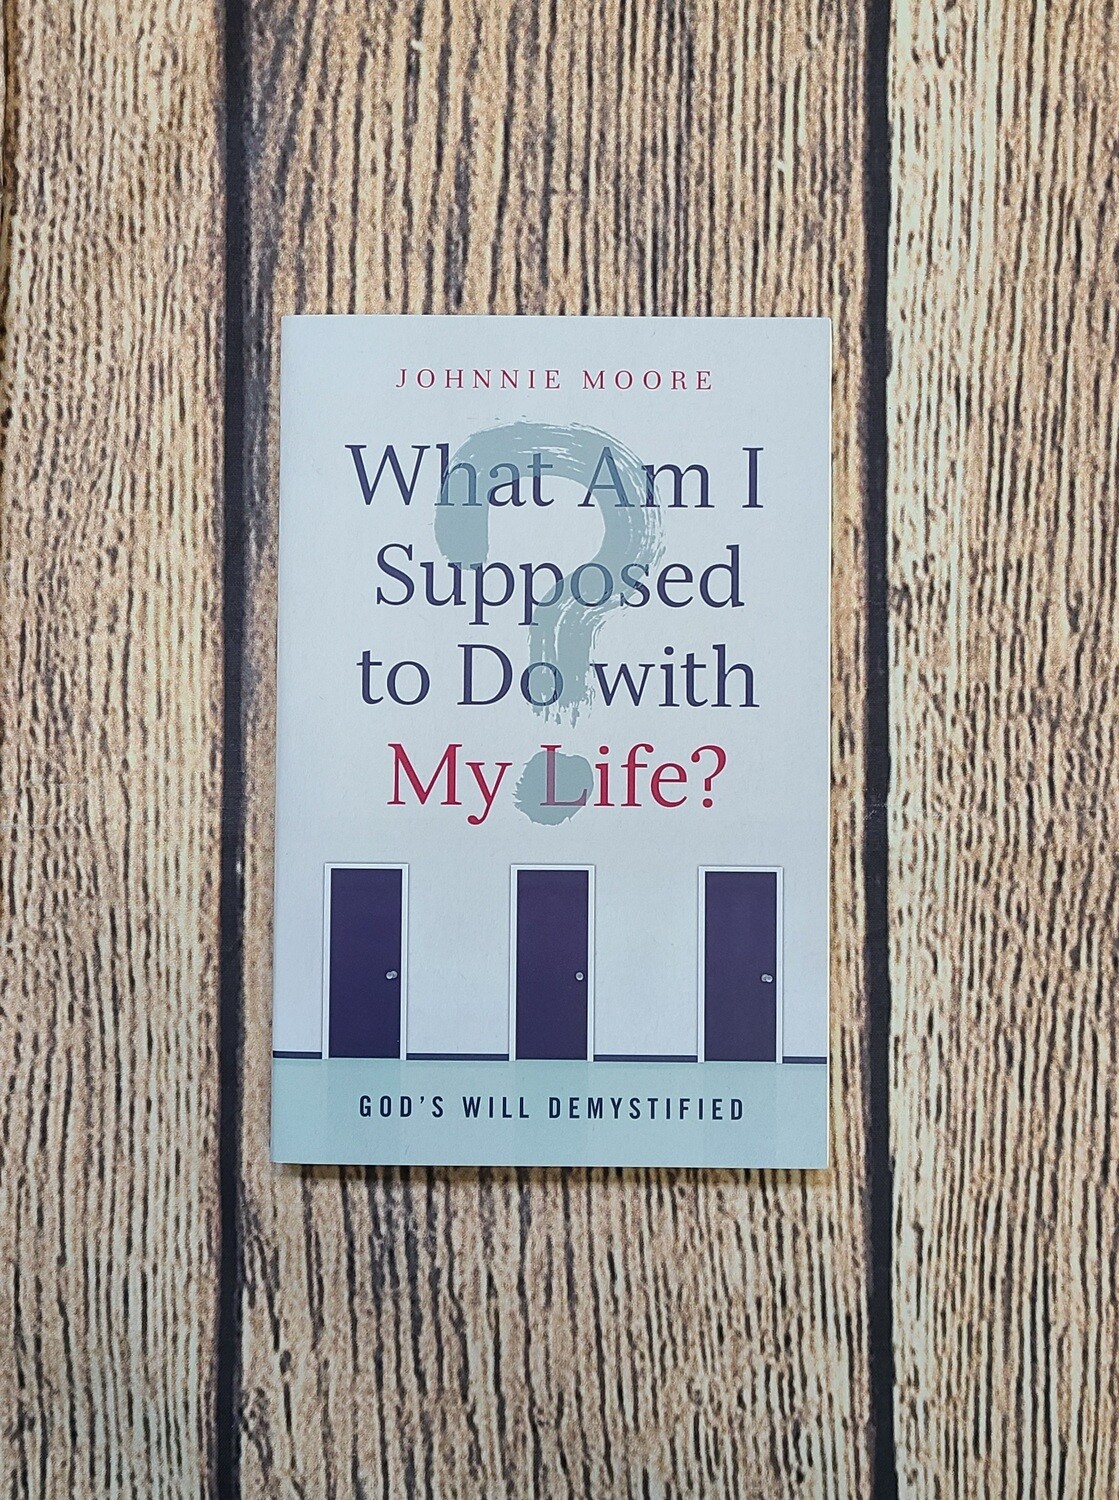 What Am I Supposed to Do with my Life? by Johnnie Moore